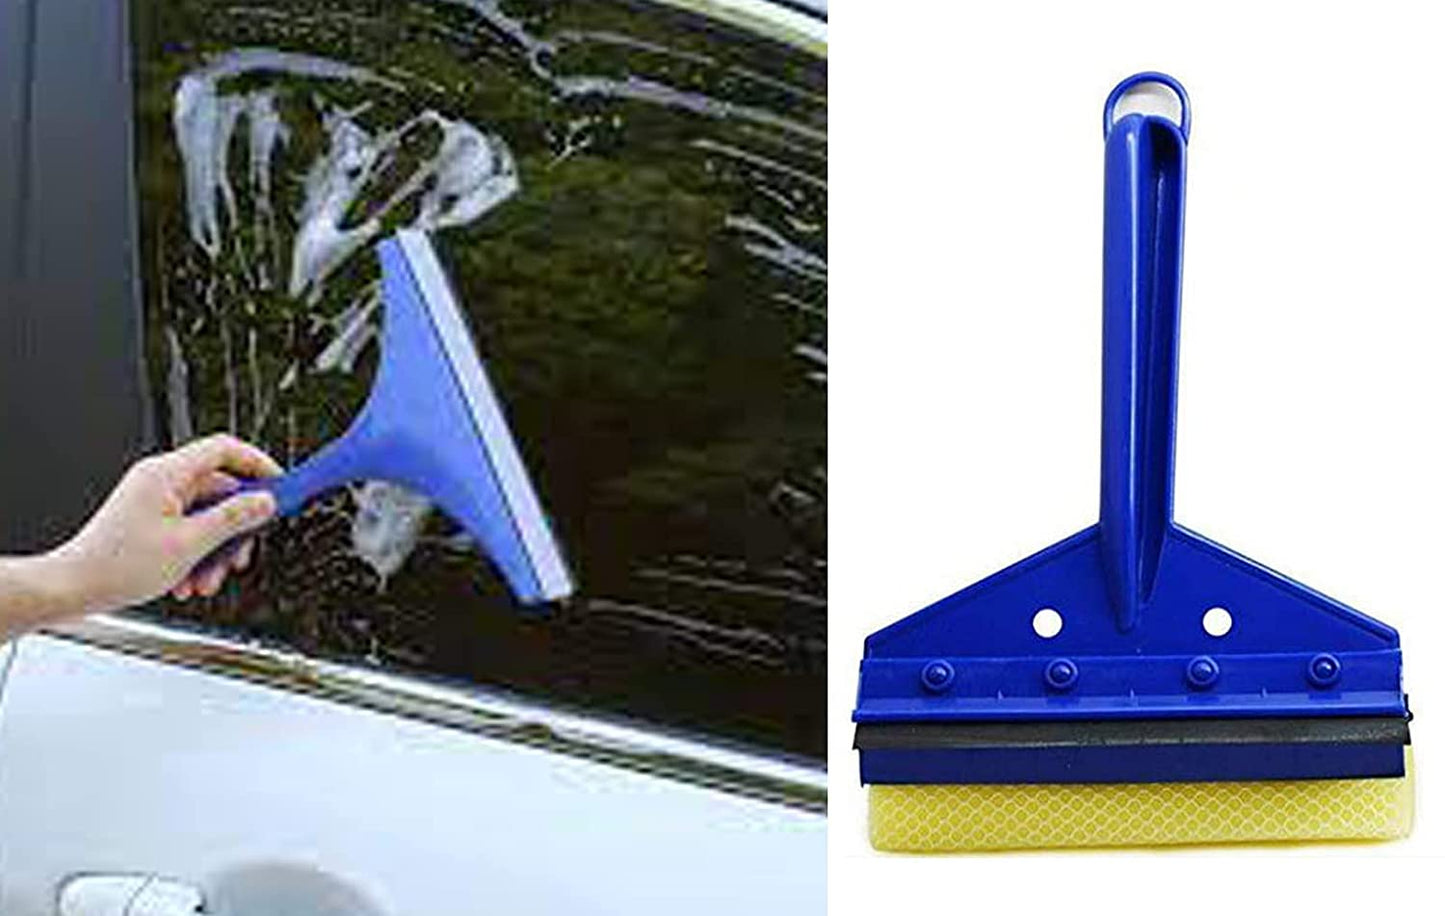 CAR SAAZ® DIY (Do It Yourself) 5 Products Car Washing / Cleaning Kit